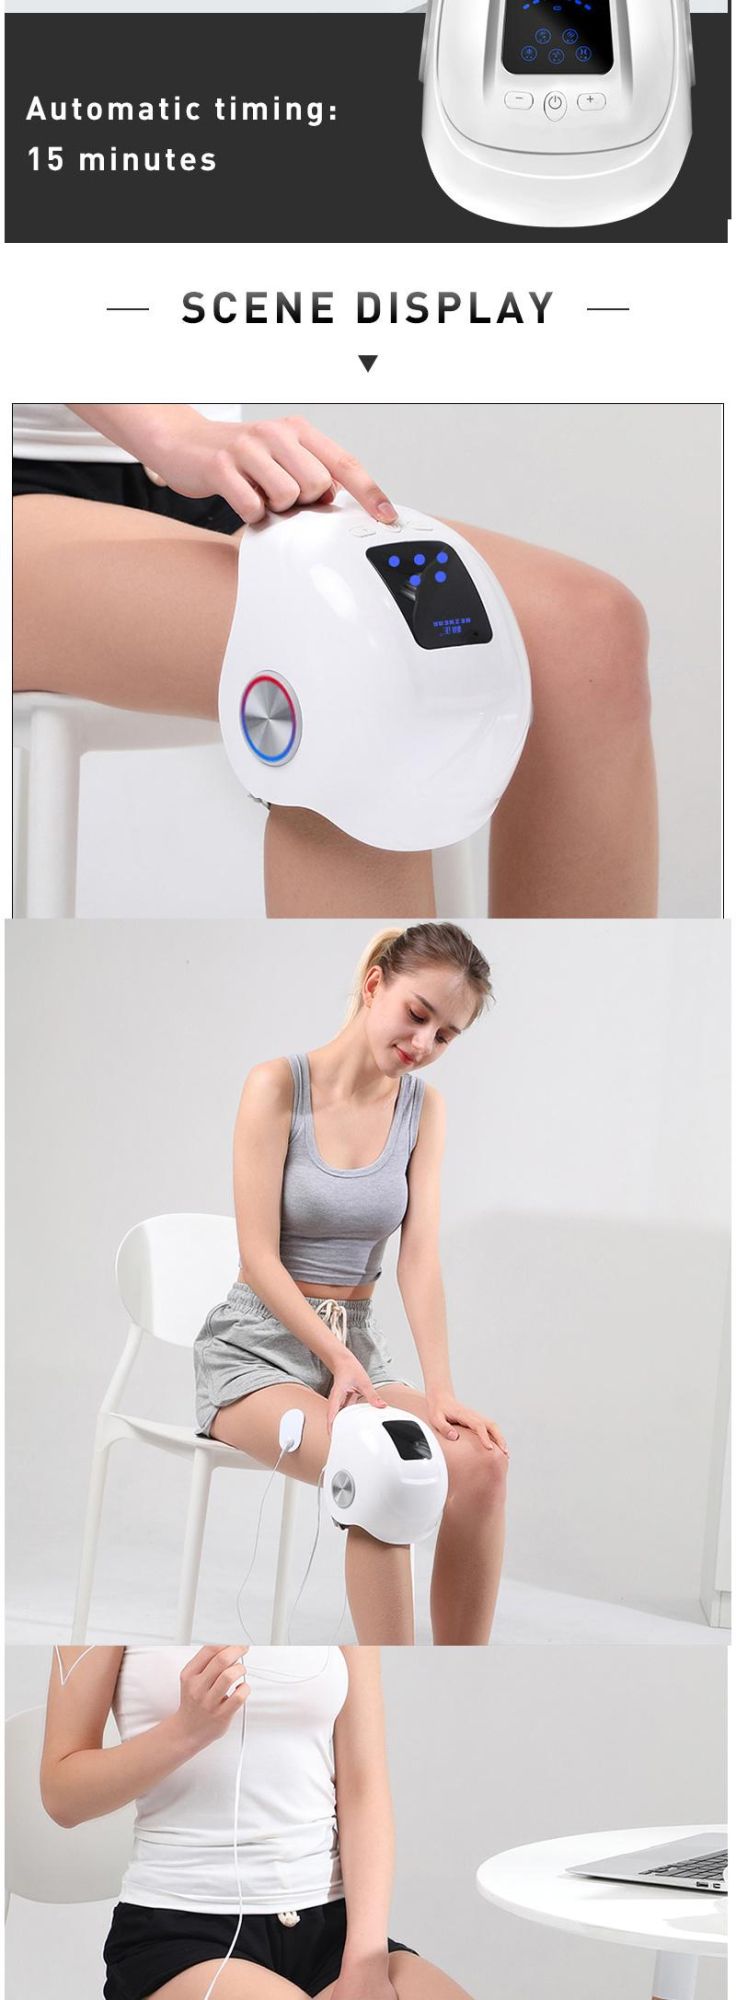 Physical Therapy Electric Hot Compress Knee Care Vibration Knee Massager